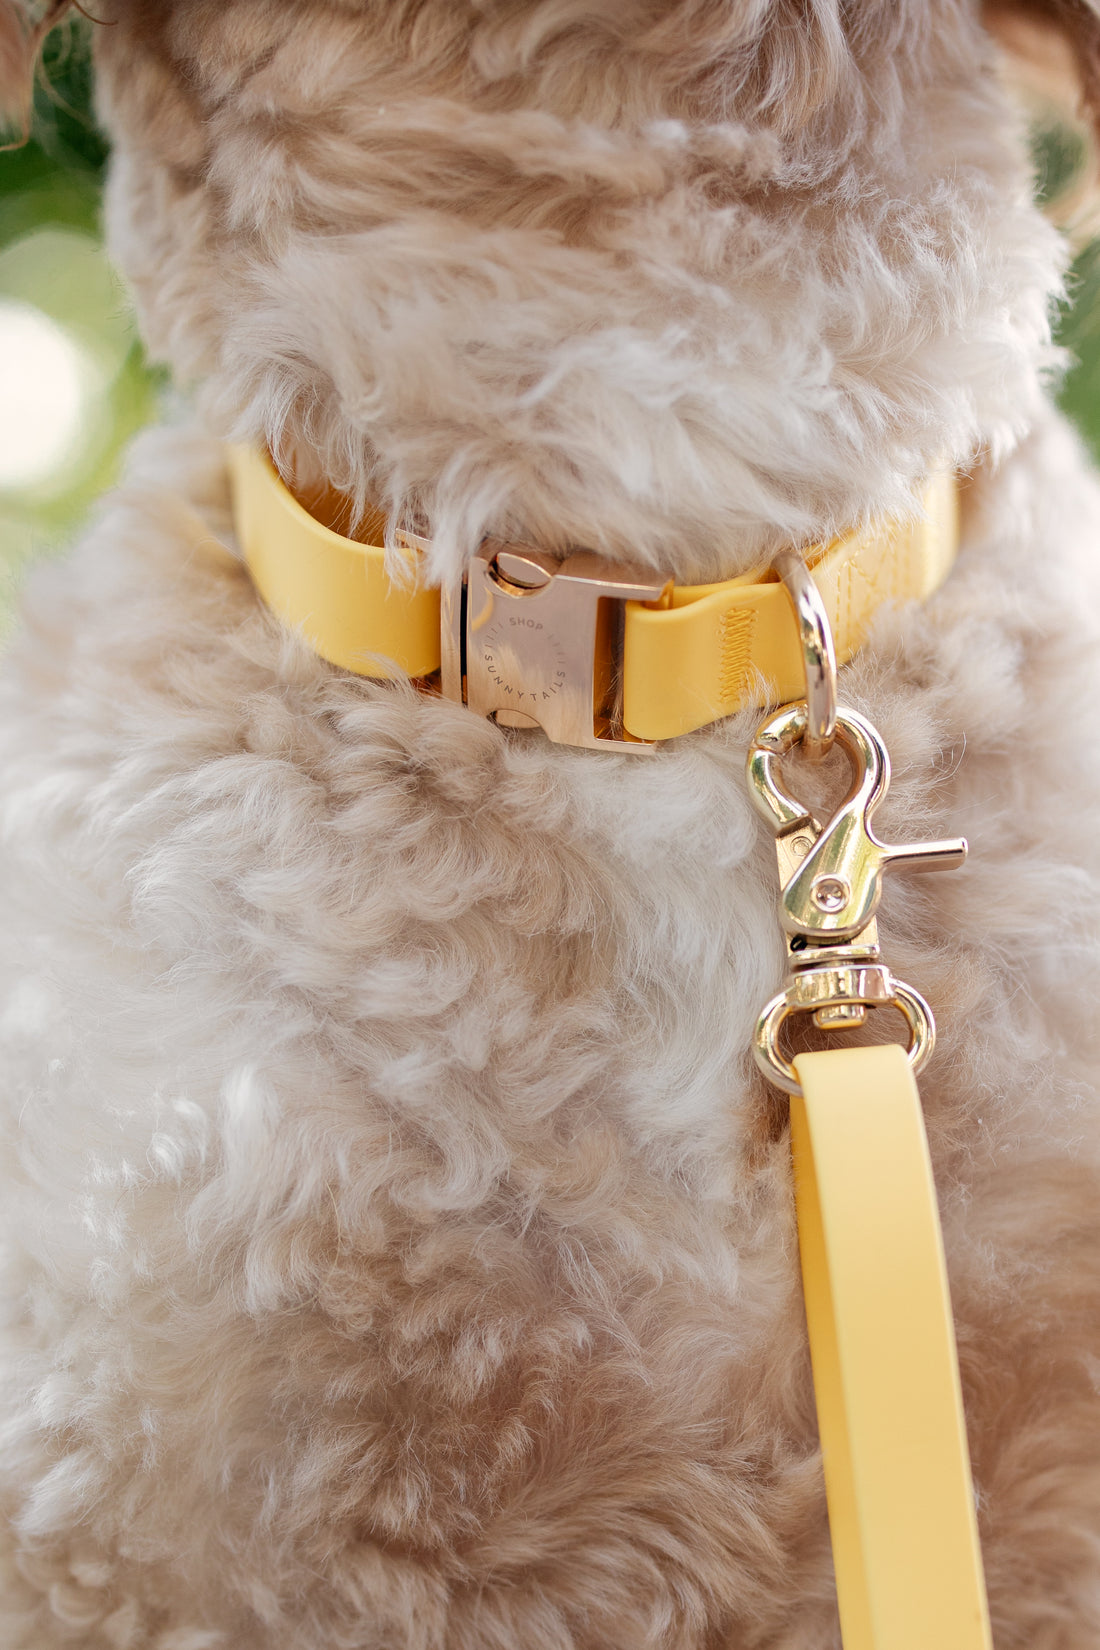 Find Wholesale Dog Collar Hardware And More Pet Accessories